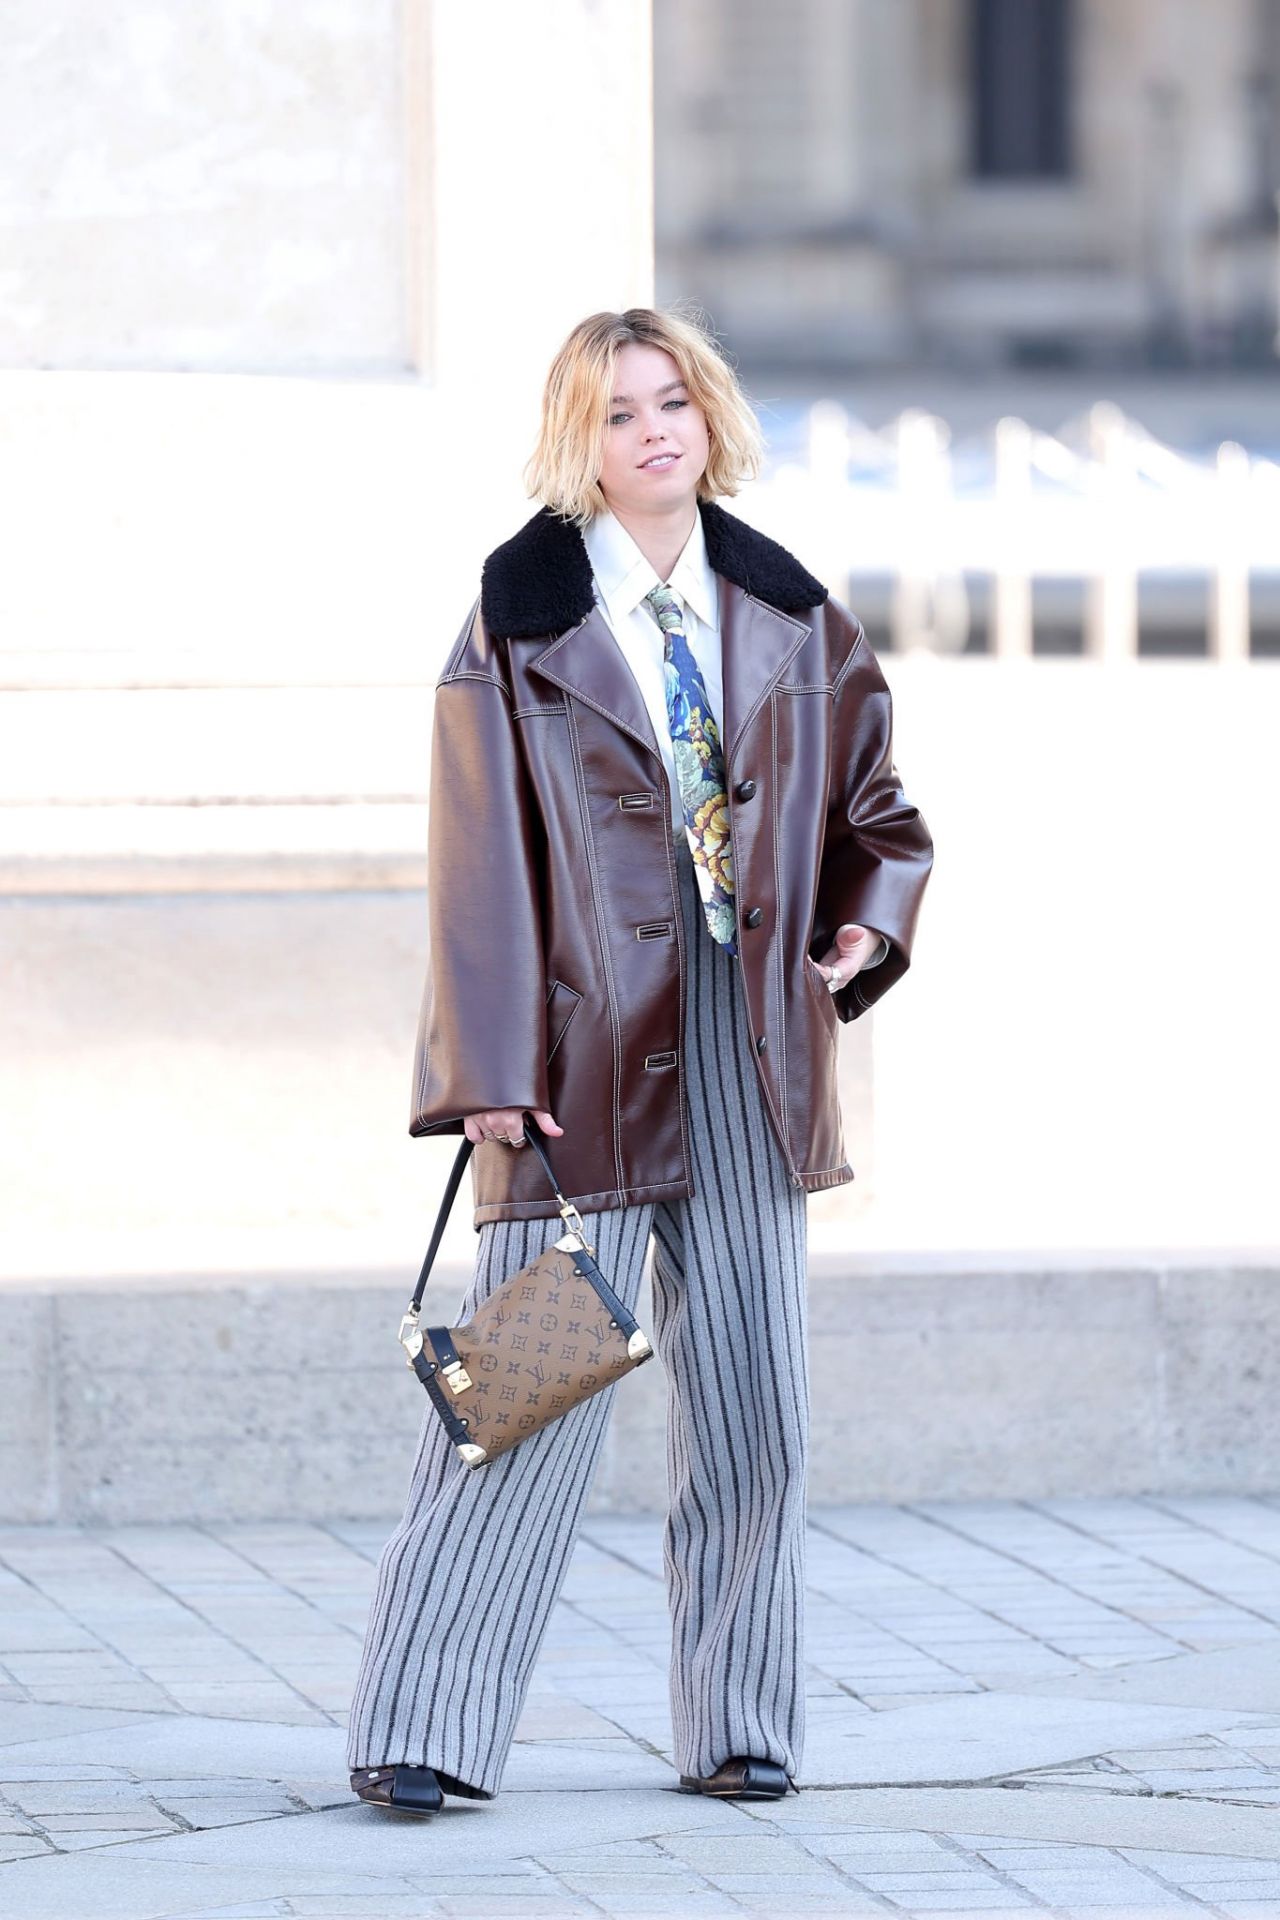 Milly Alcock Milly-alcock-louis-vuitton-show-in-paris-10-04-2022-5